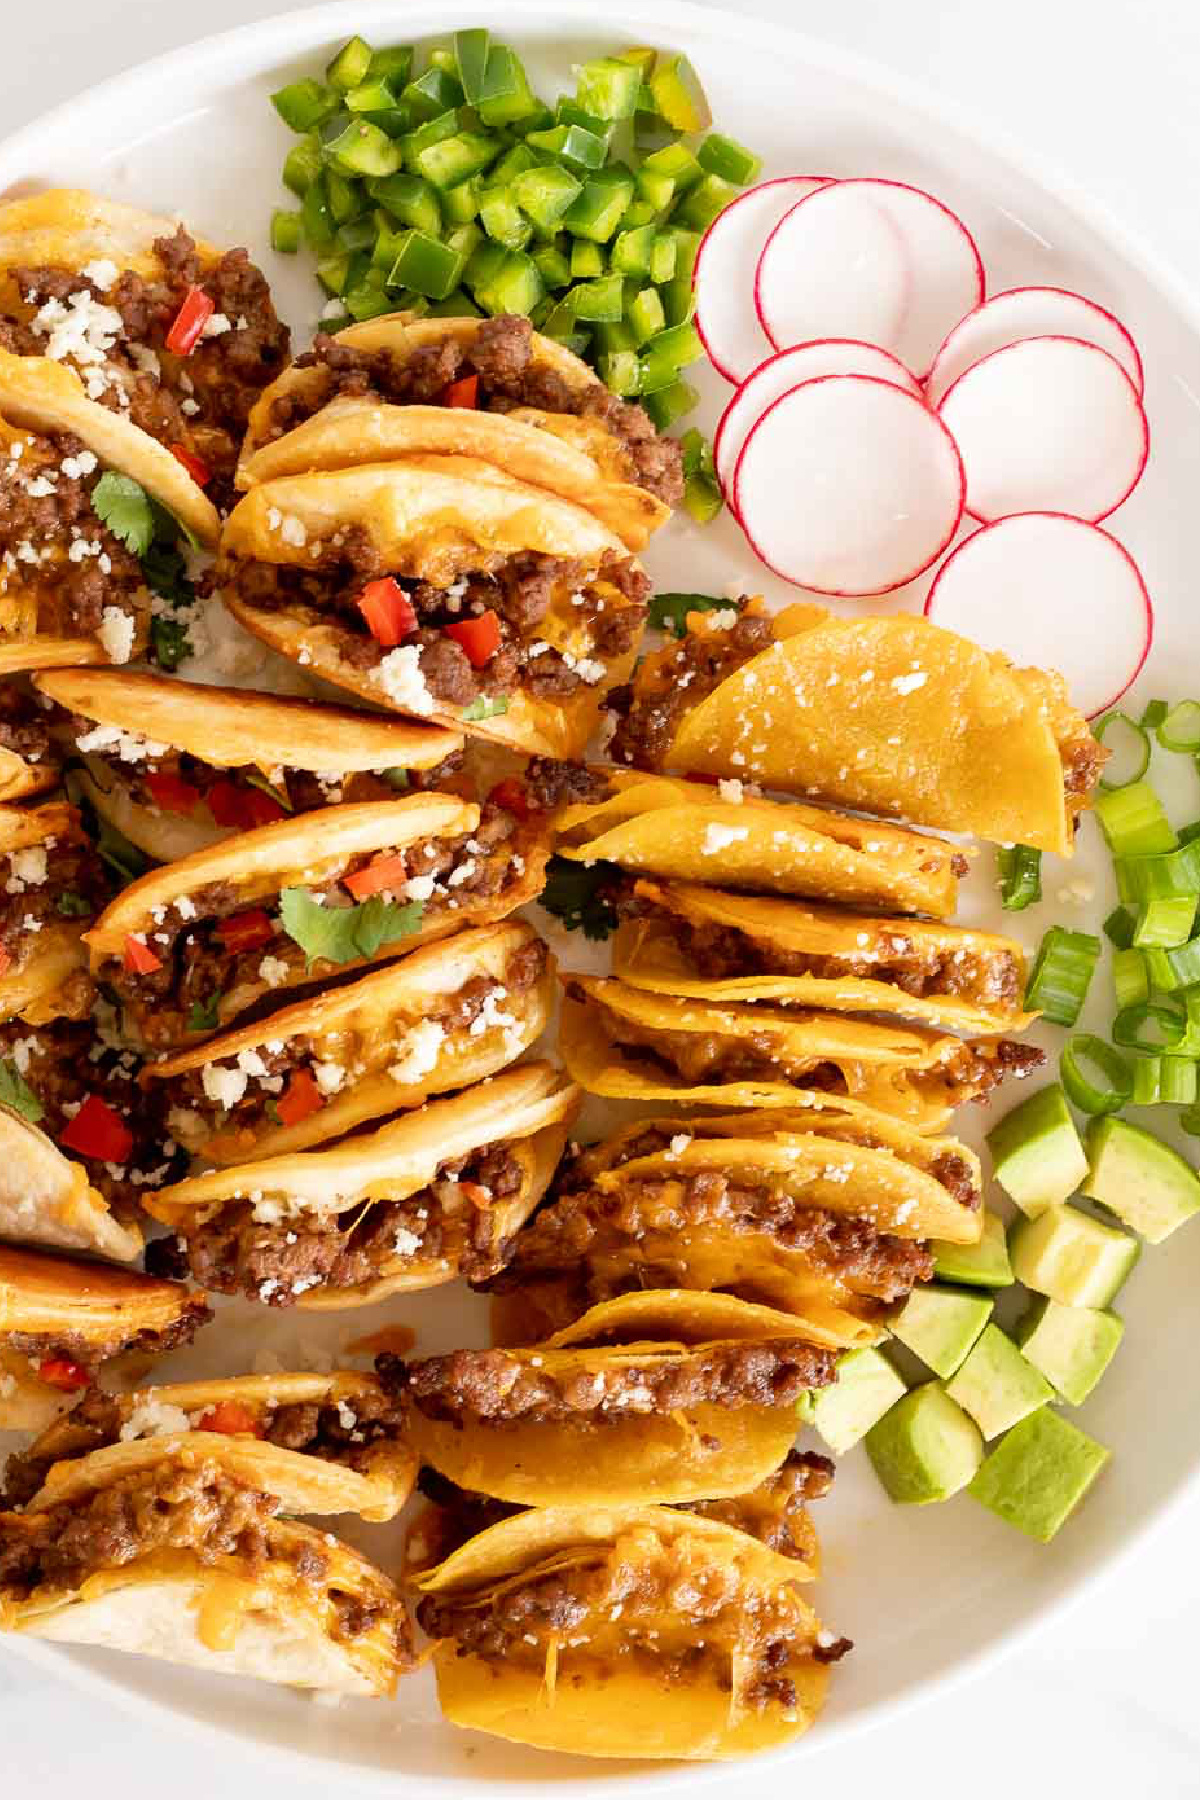 Cheap Party Food Ideas - Mini Ground Beef Tacos